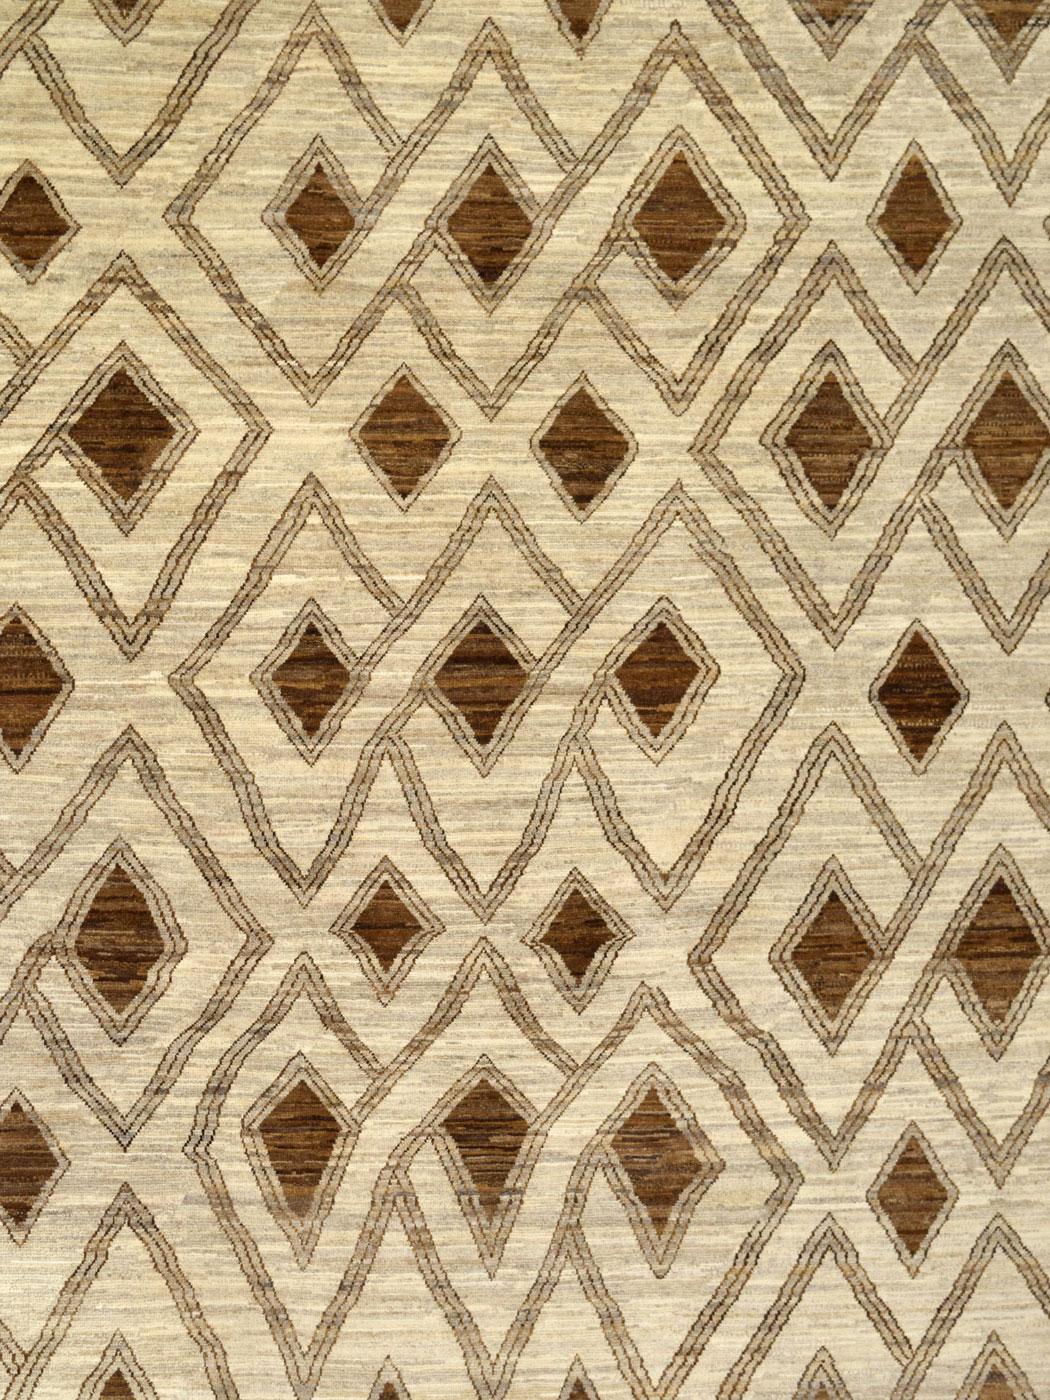 Modern Geometric Neutral Wool Carpet in Brown and Cream, 6' x 9' For Sale